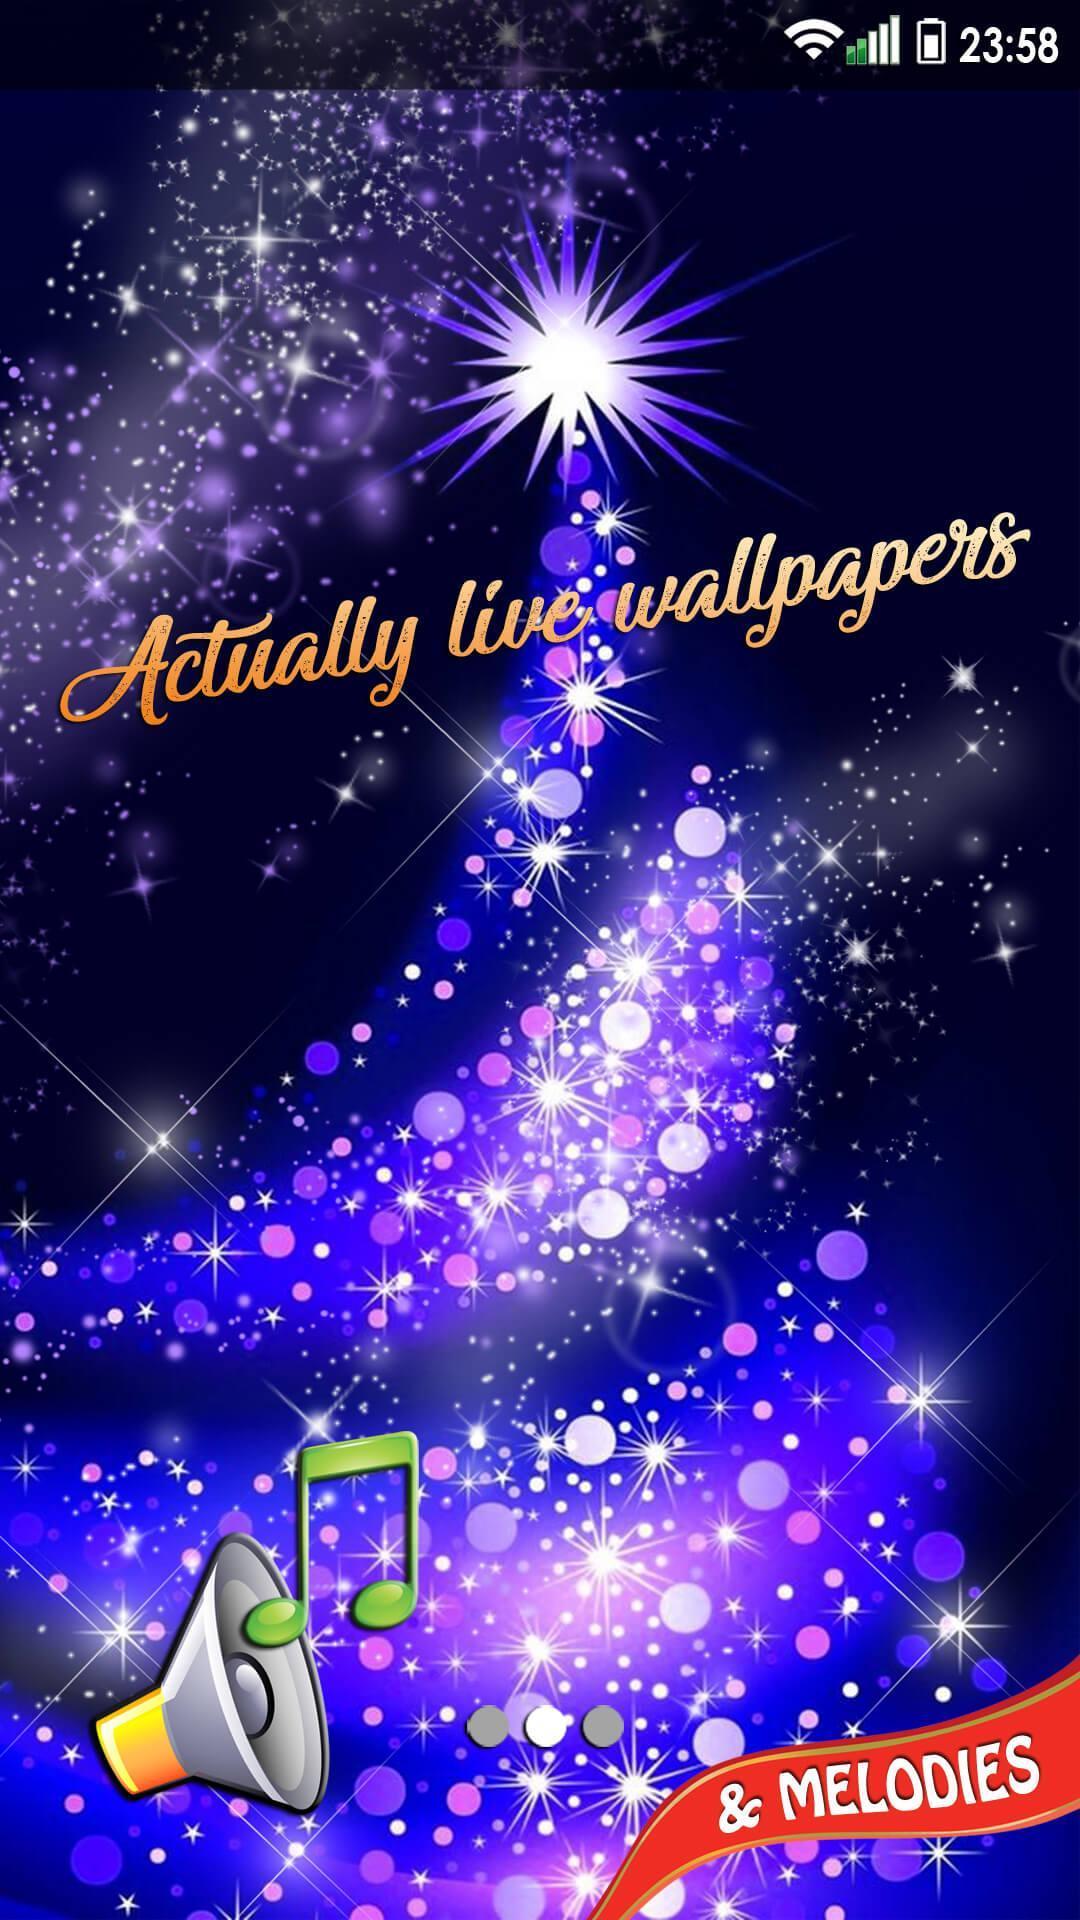 Christmas Songs Live Wallpaper for Android